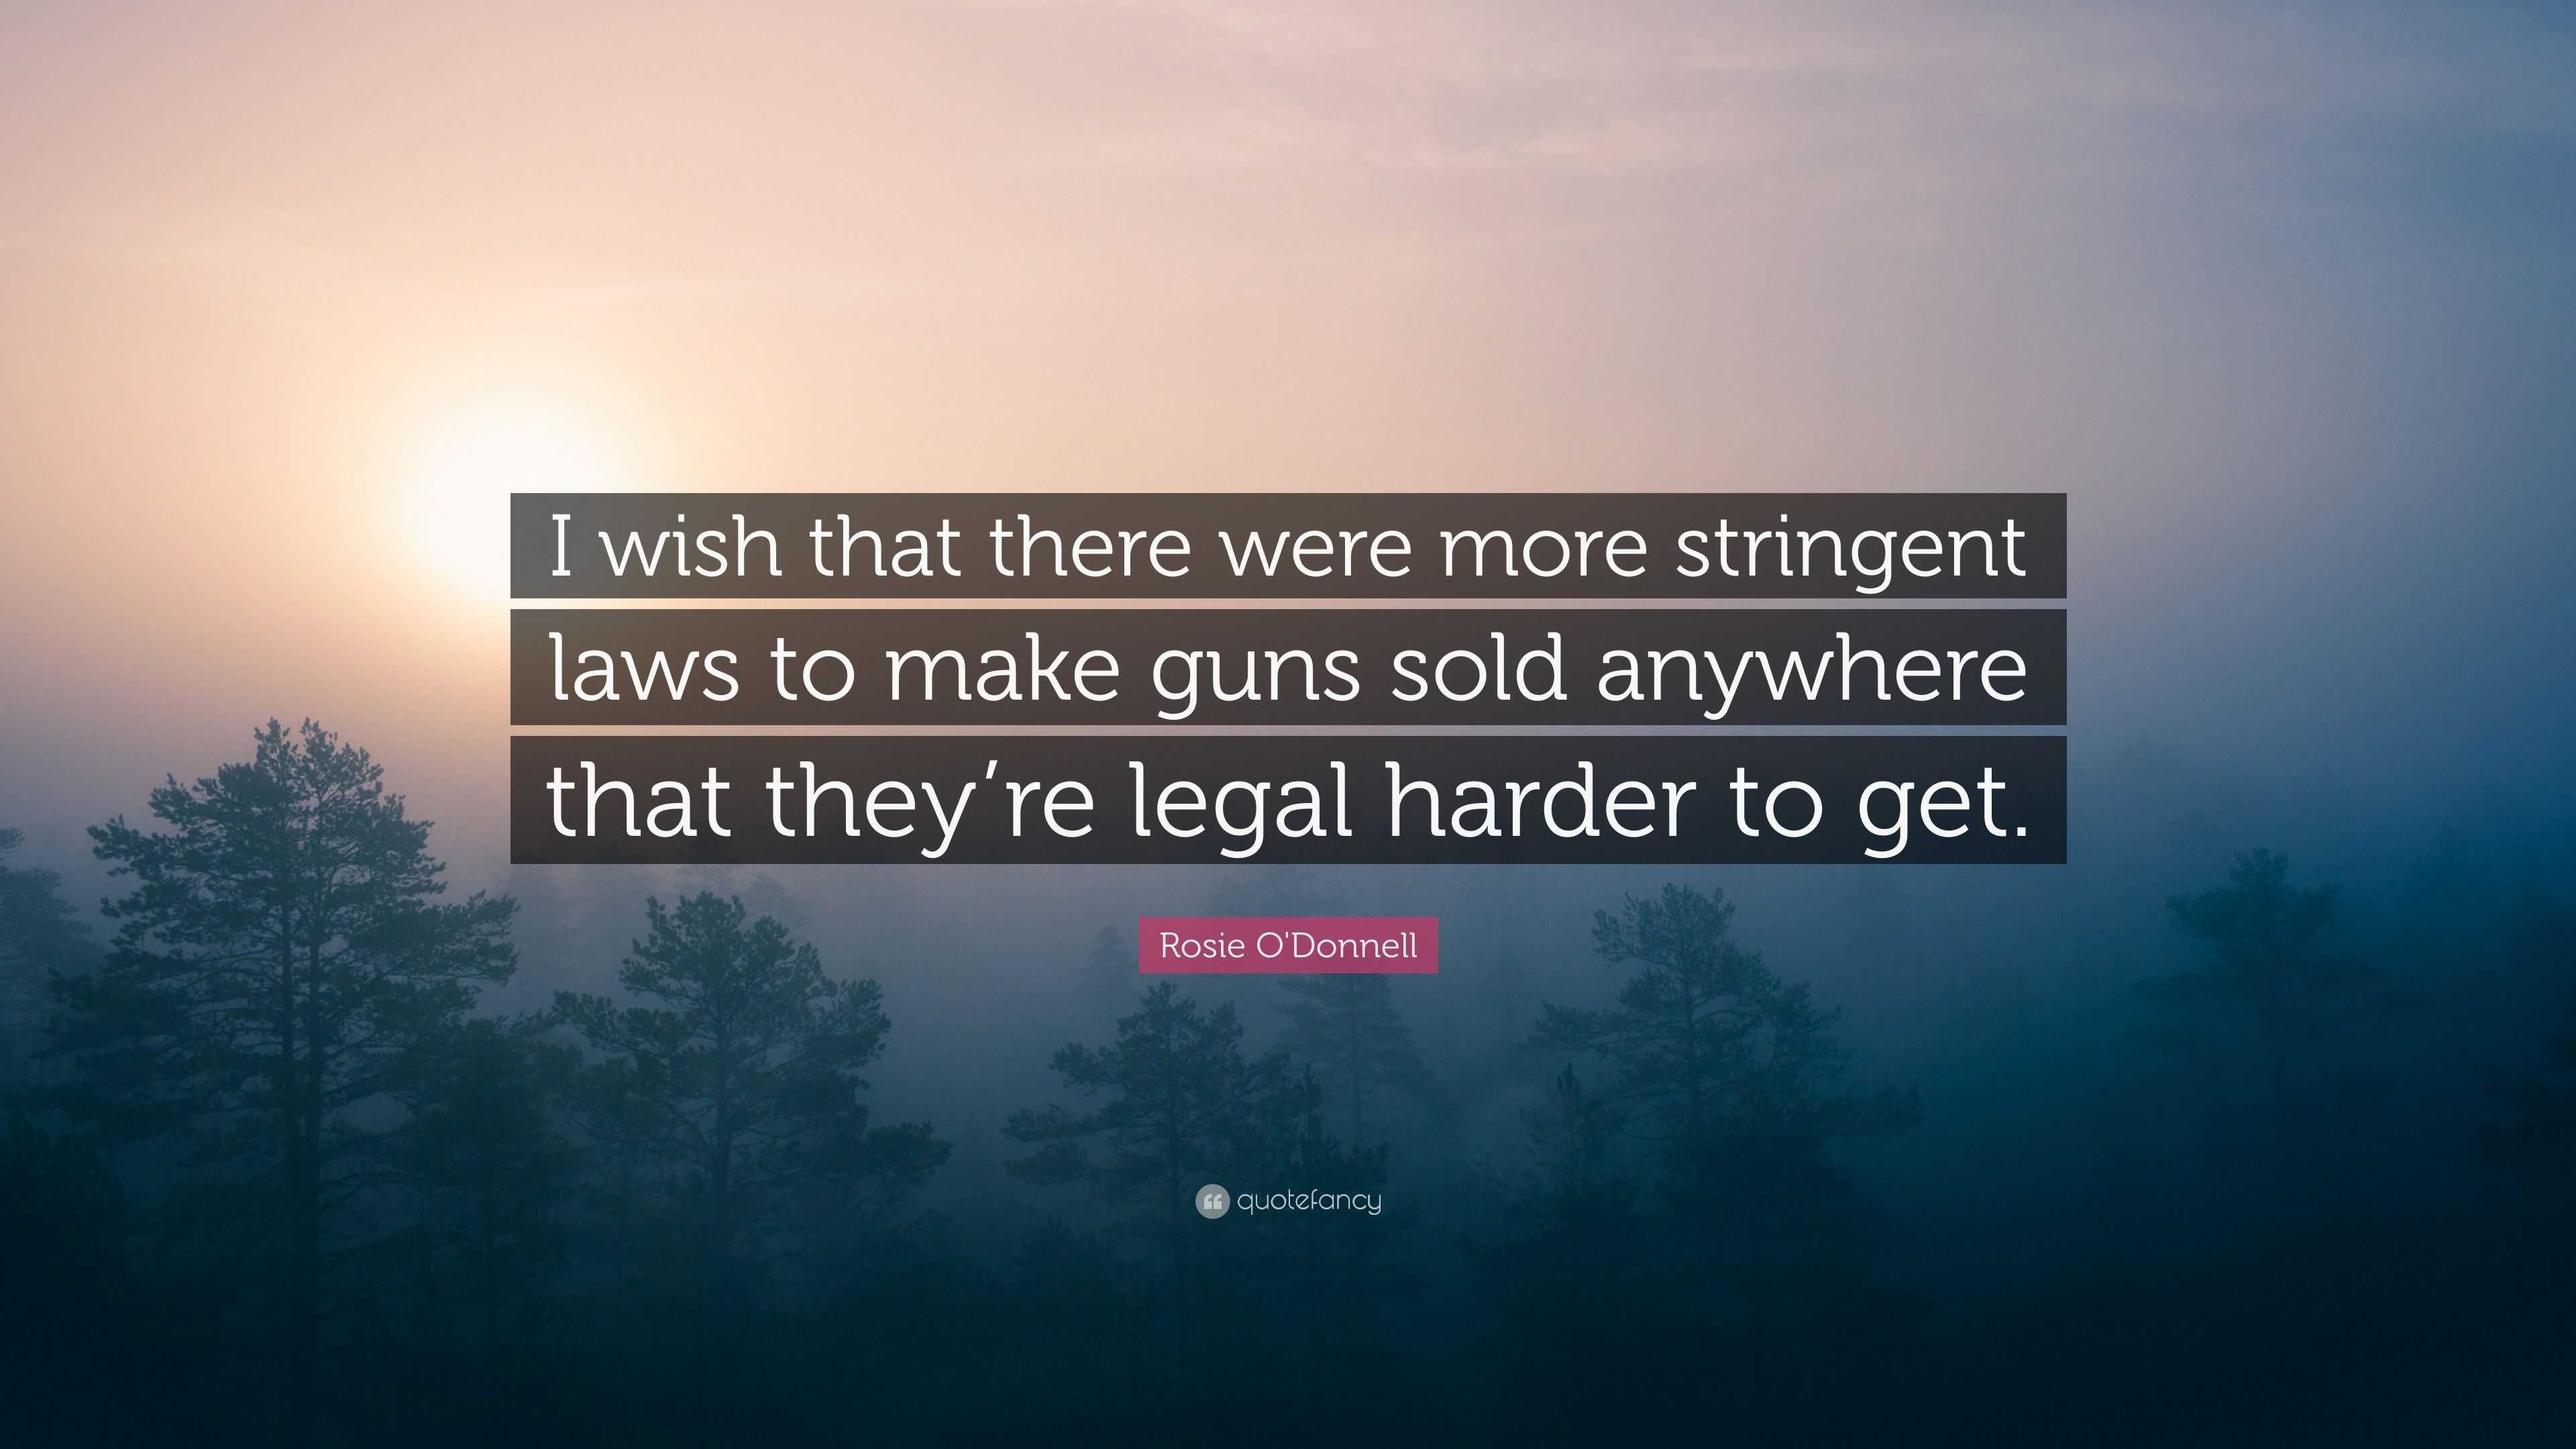 Rosie O'Donnell Quote: “I wish that there were more stringent laws to make  guns sold